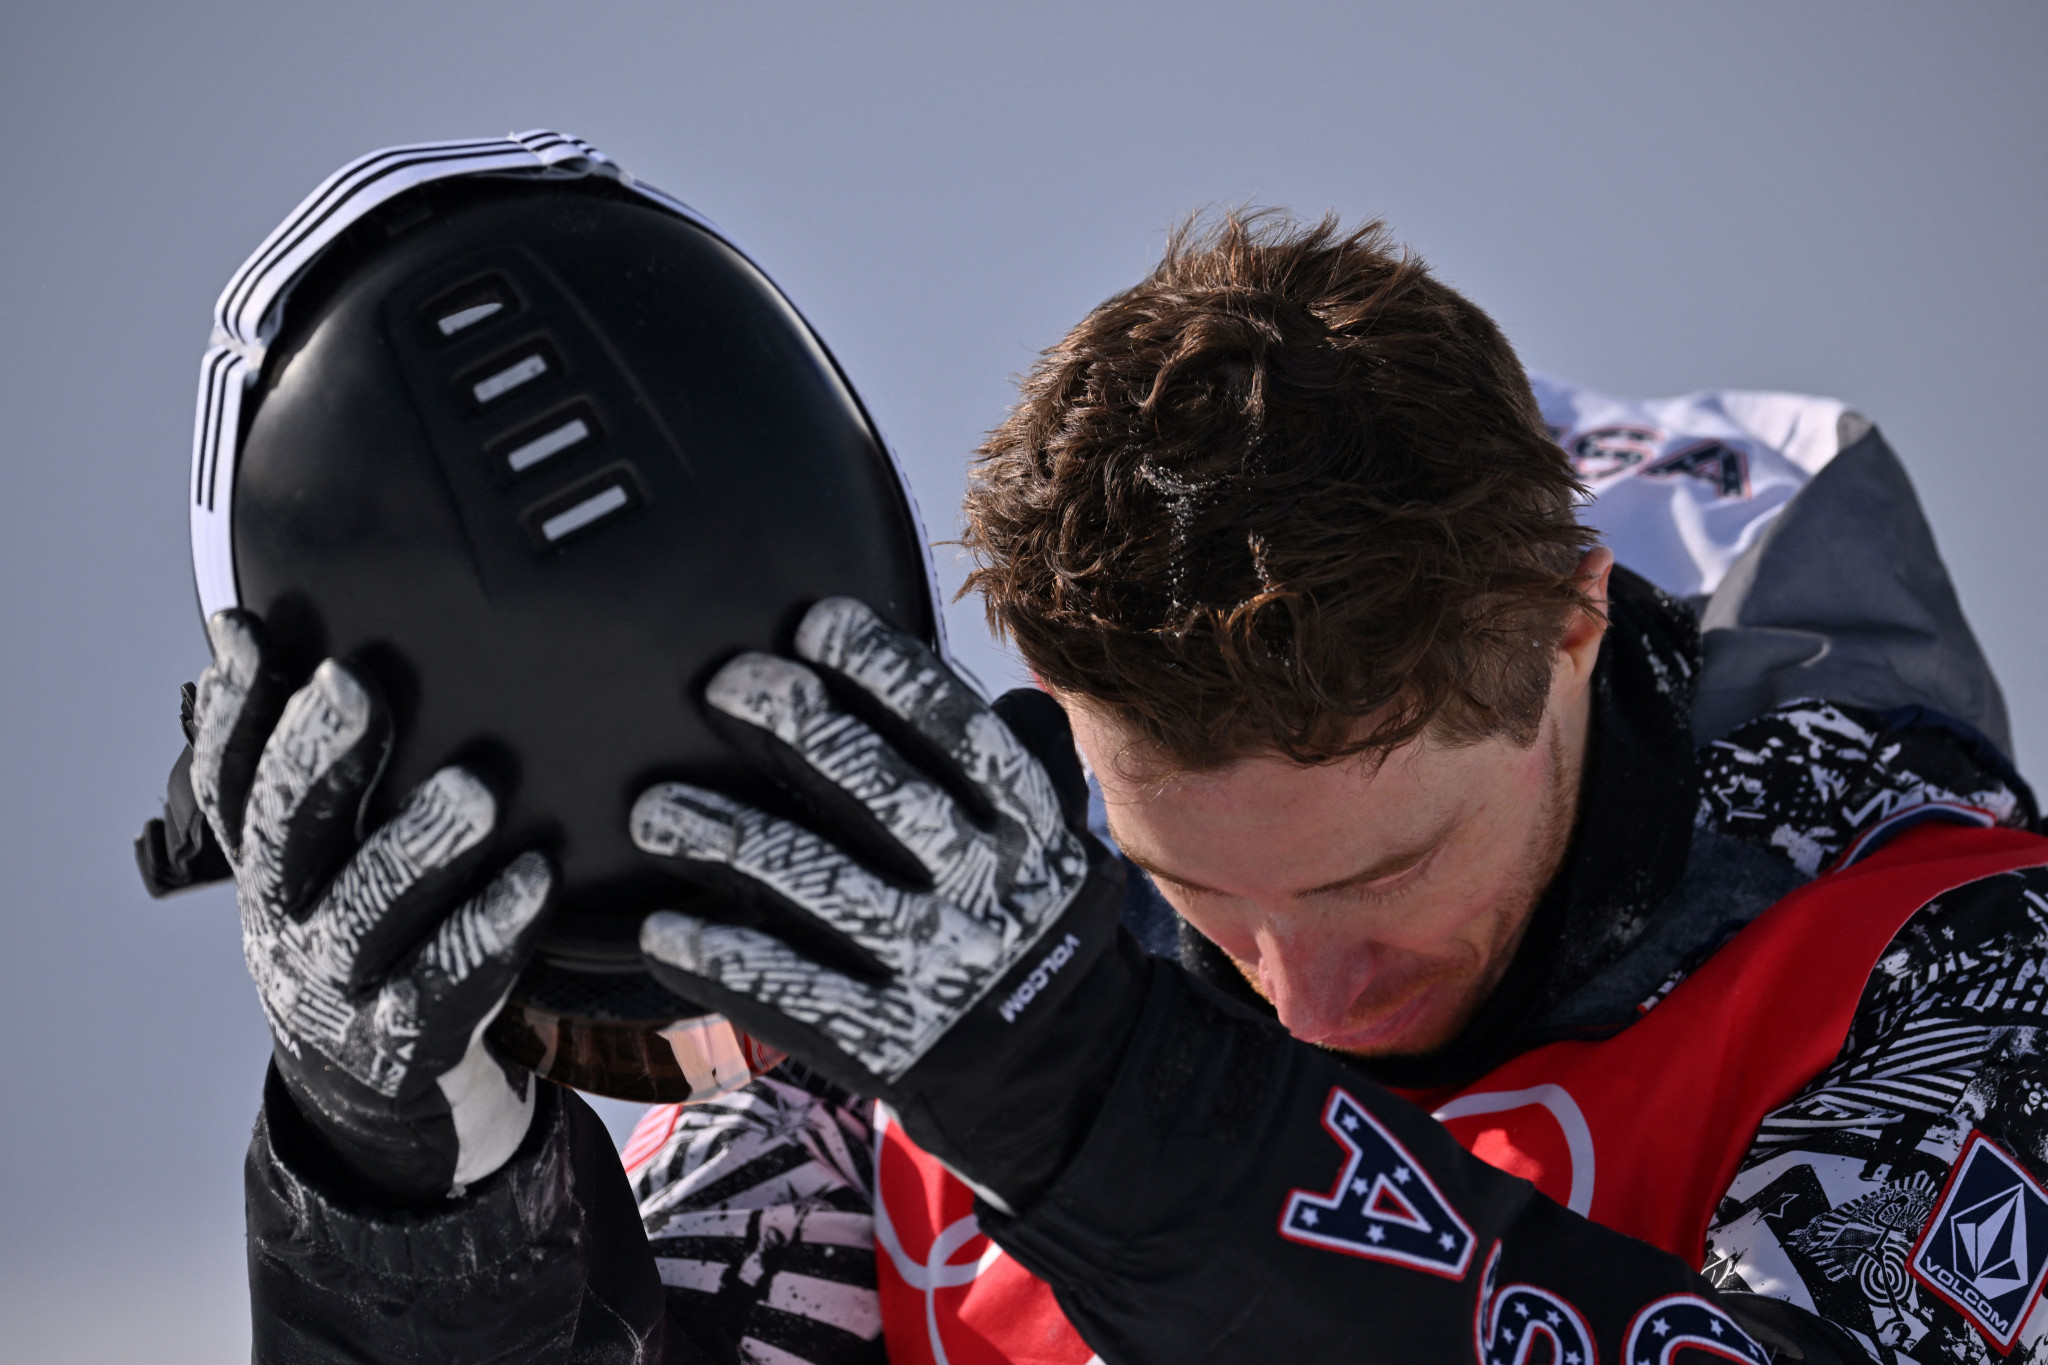 The United States' three-time Olympic gold medallist Shaun White said farewell to the sport with fourth in the men's snowboard halfpipe final ©Getty Images